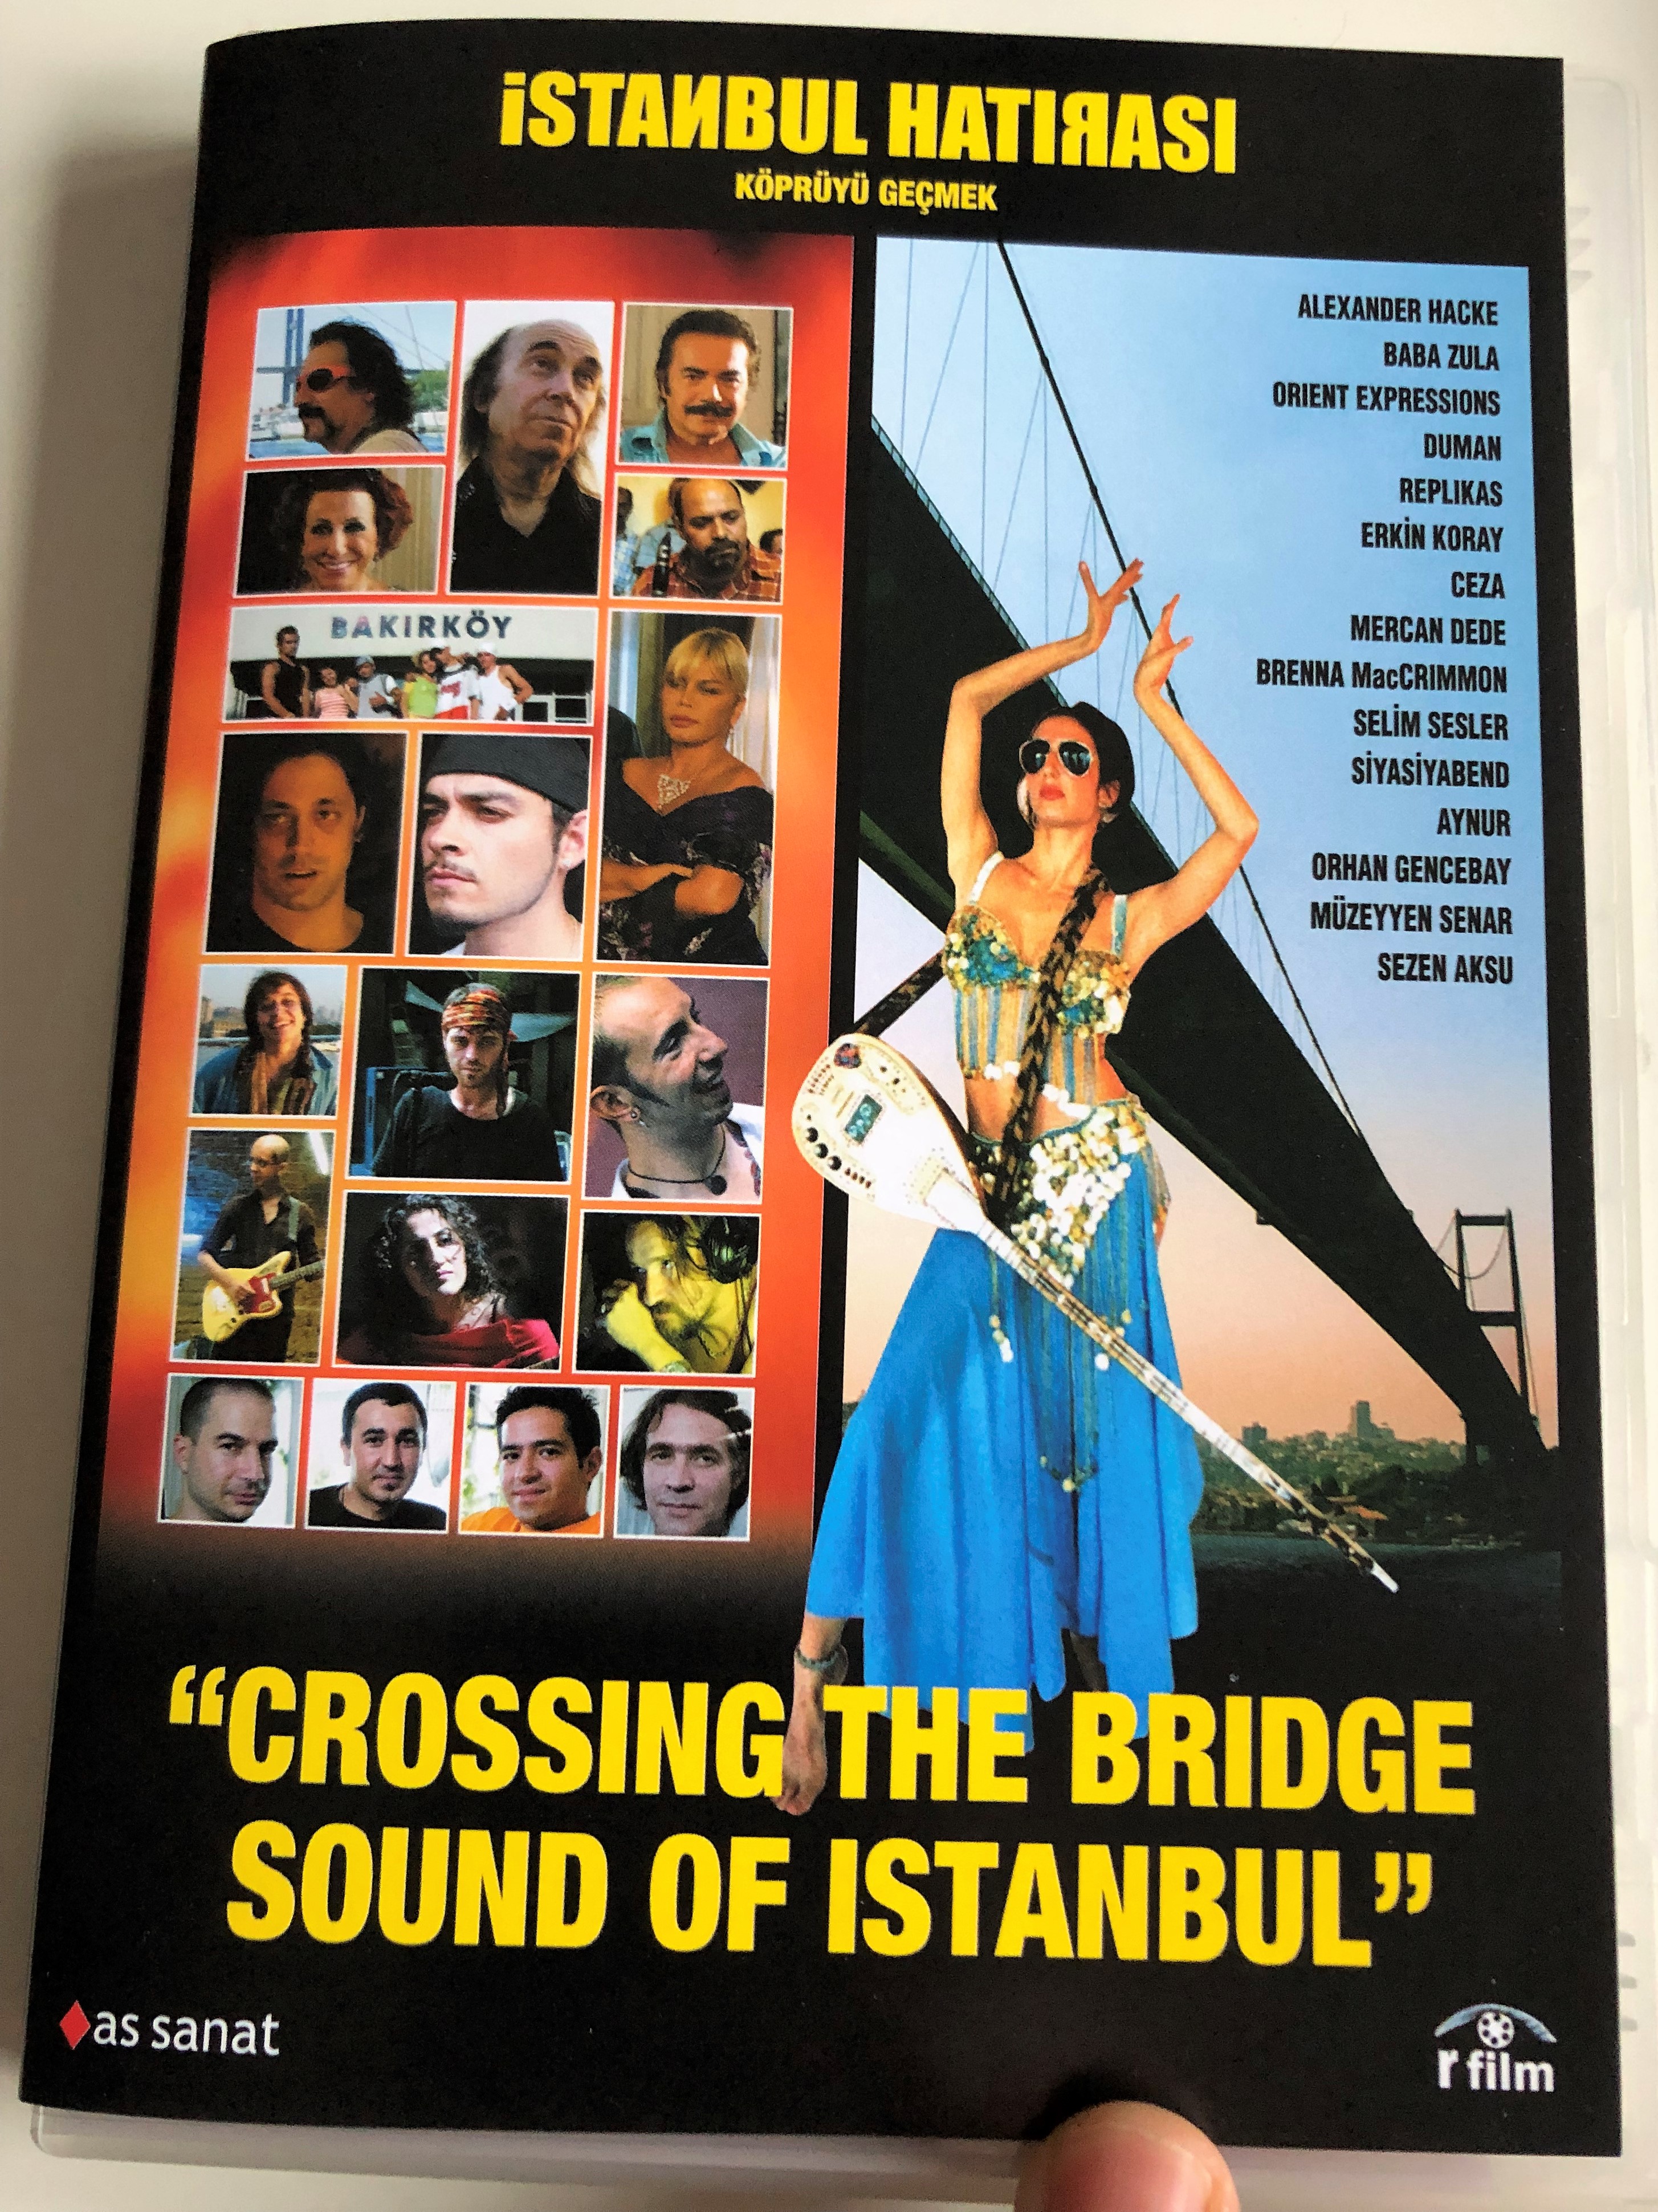 -stanbul-hat-ras-dvd-2005-crossing-the-bridge-sound-of-istanbul-directed-by-fatih-ak-n-documentary-a-journey-through-the-music-scene-in-modern-istanbul-1-.jpg